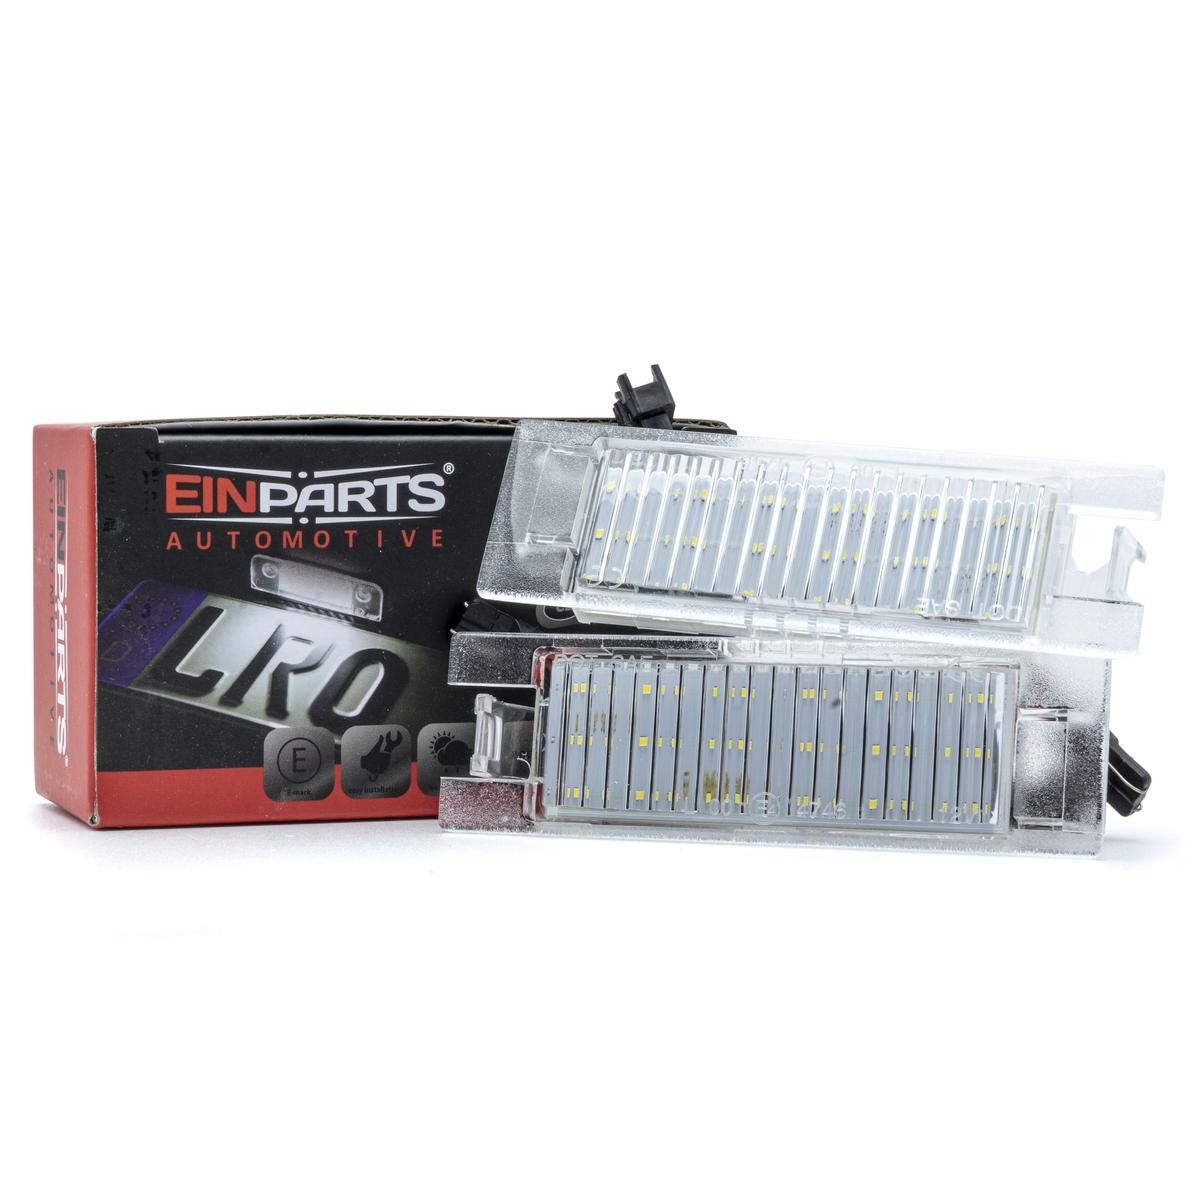 EINPARTS Number plate light Doblo II Platform/Chassis (263) new EP183